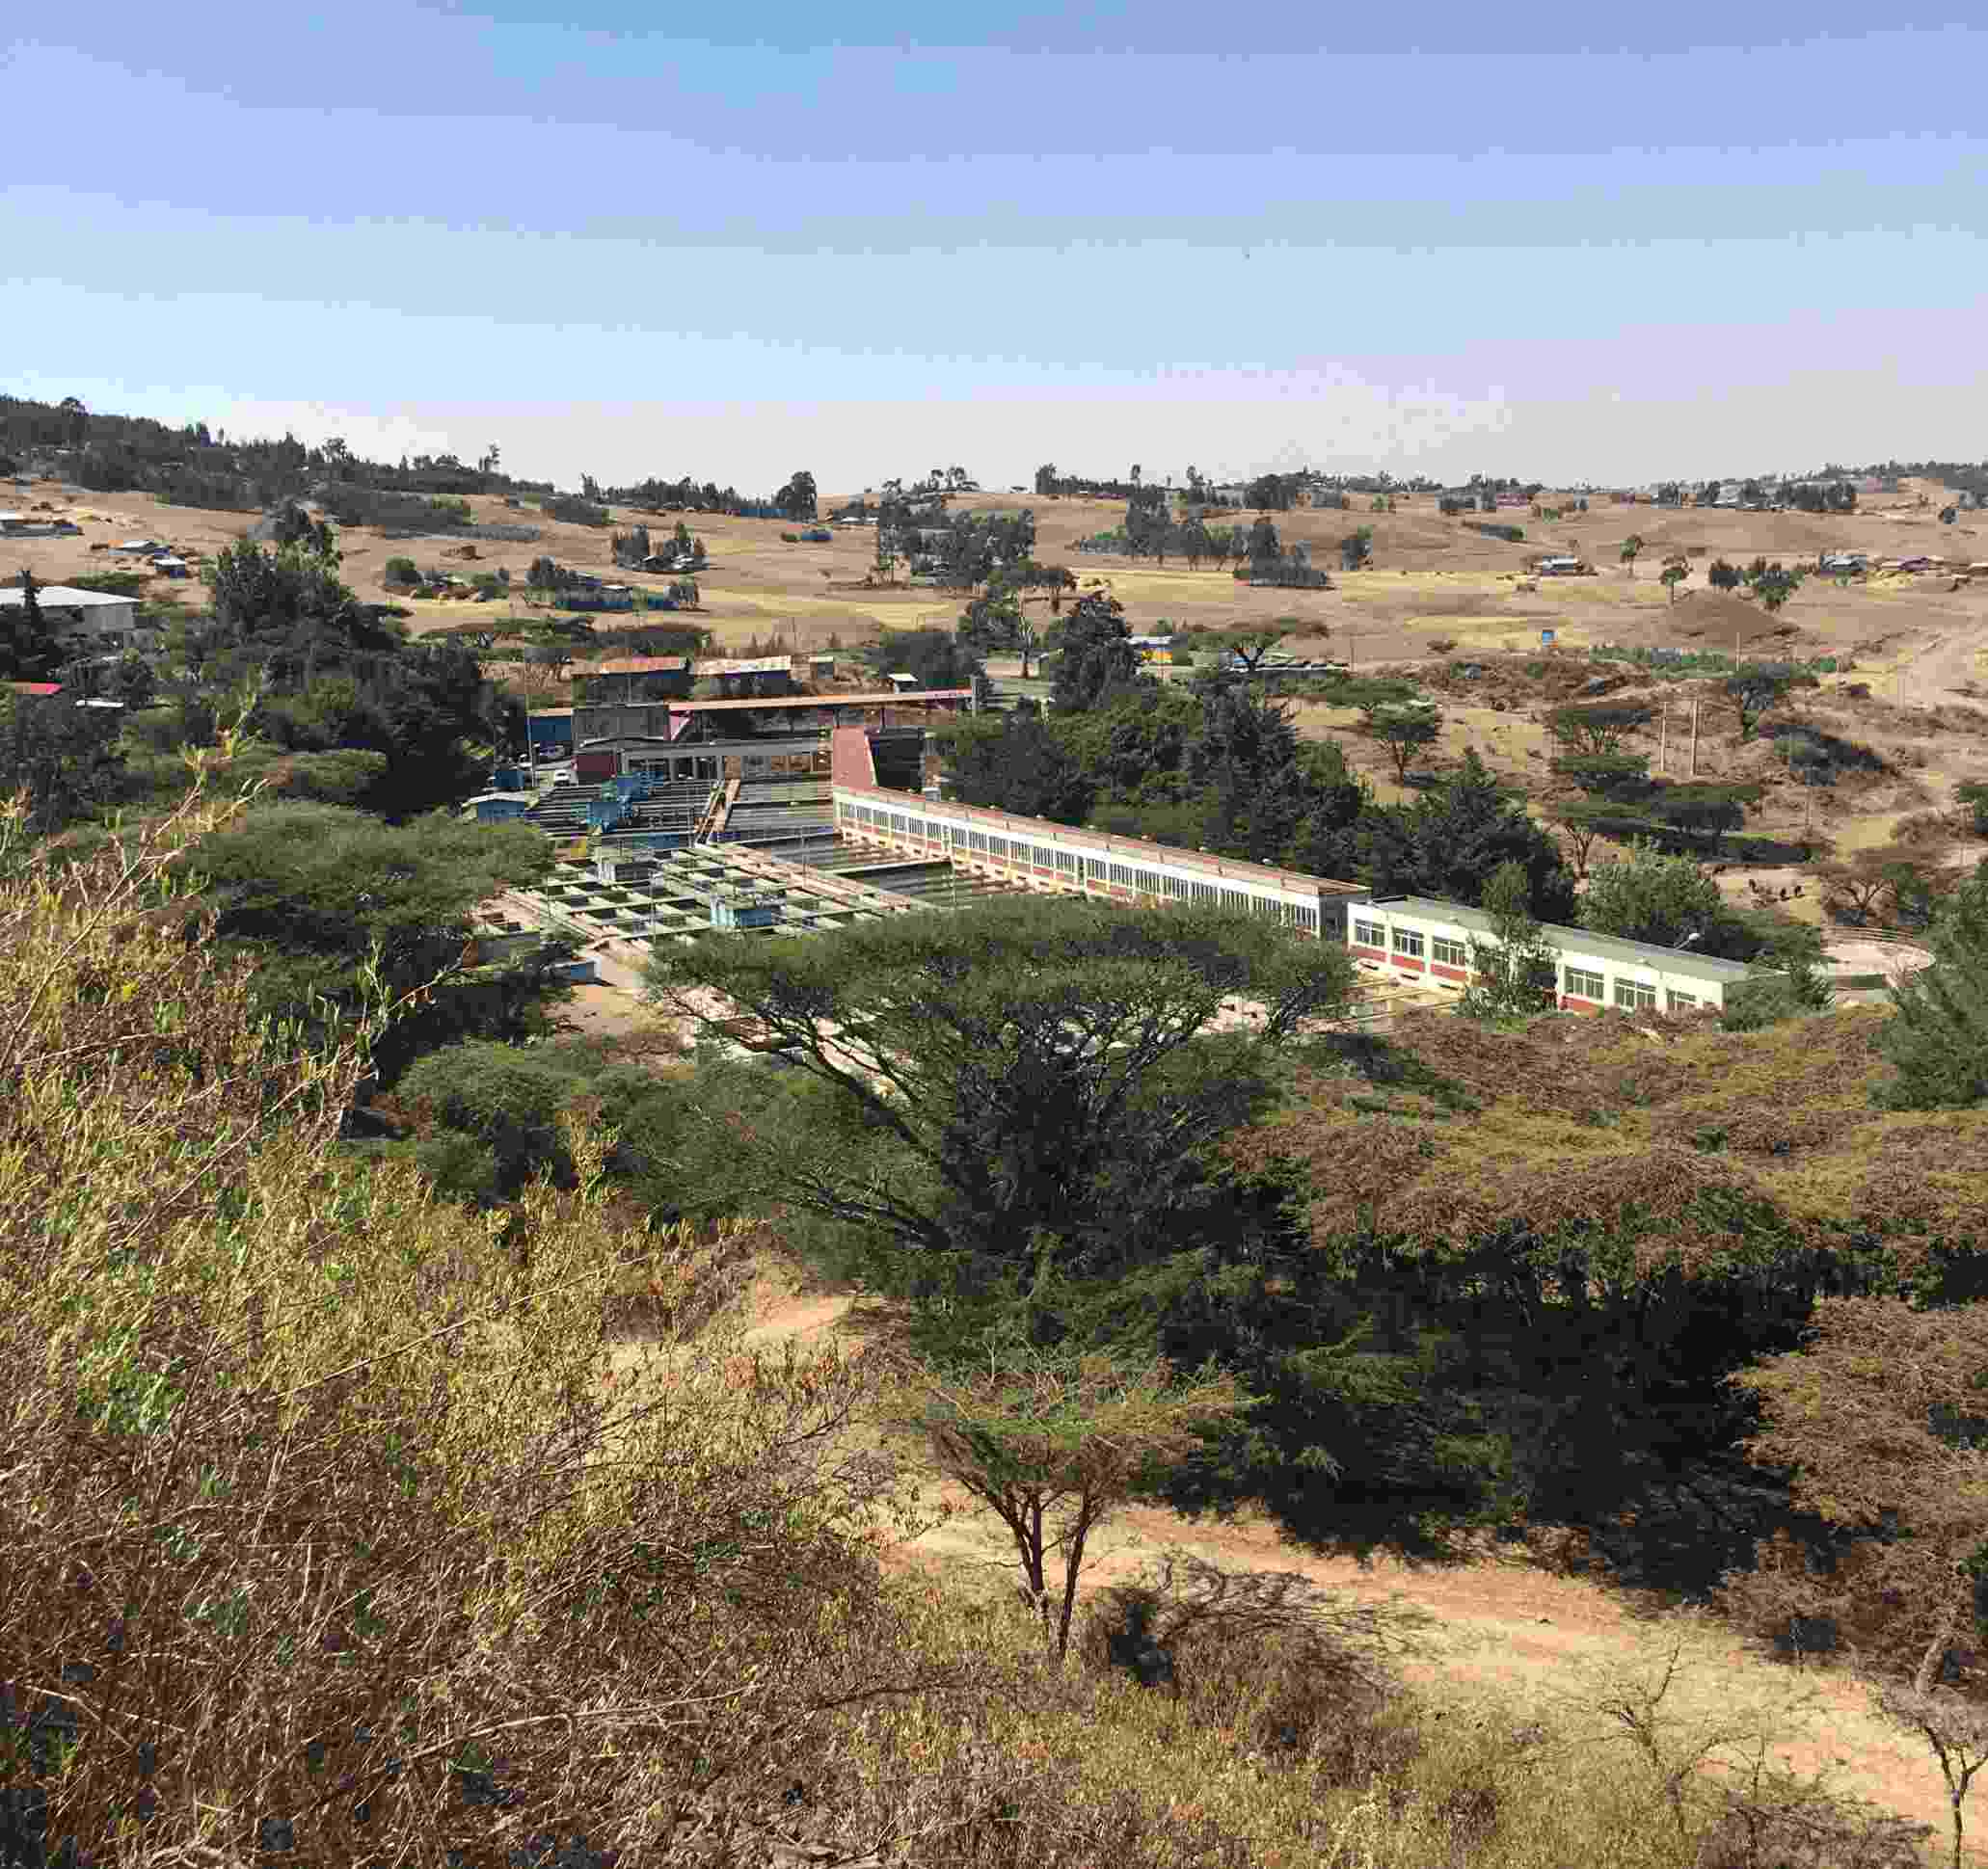 Image shows the Legedadi Reservoir from a distance, surrounded by trees and open land